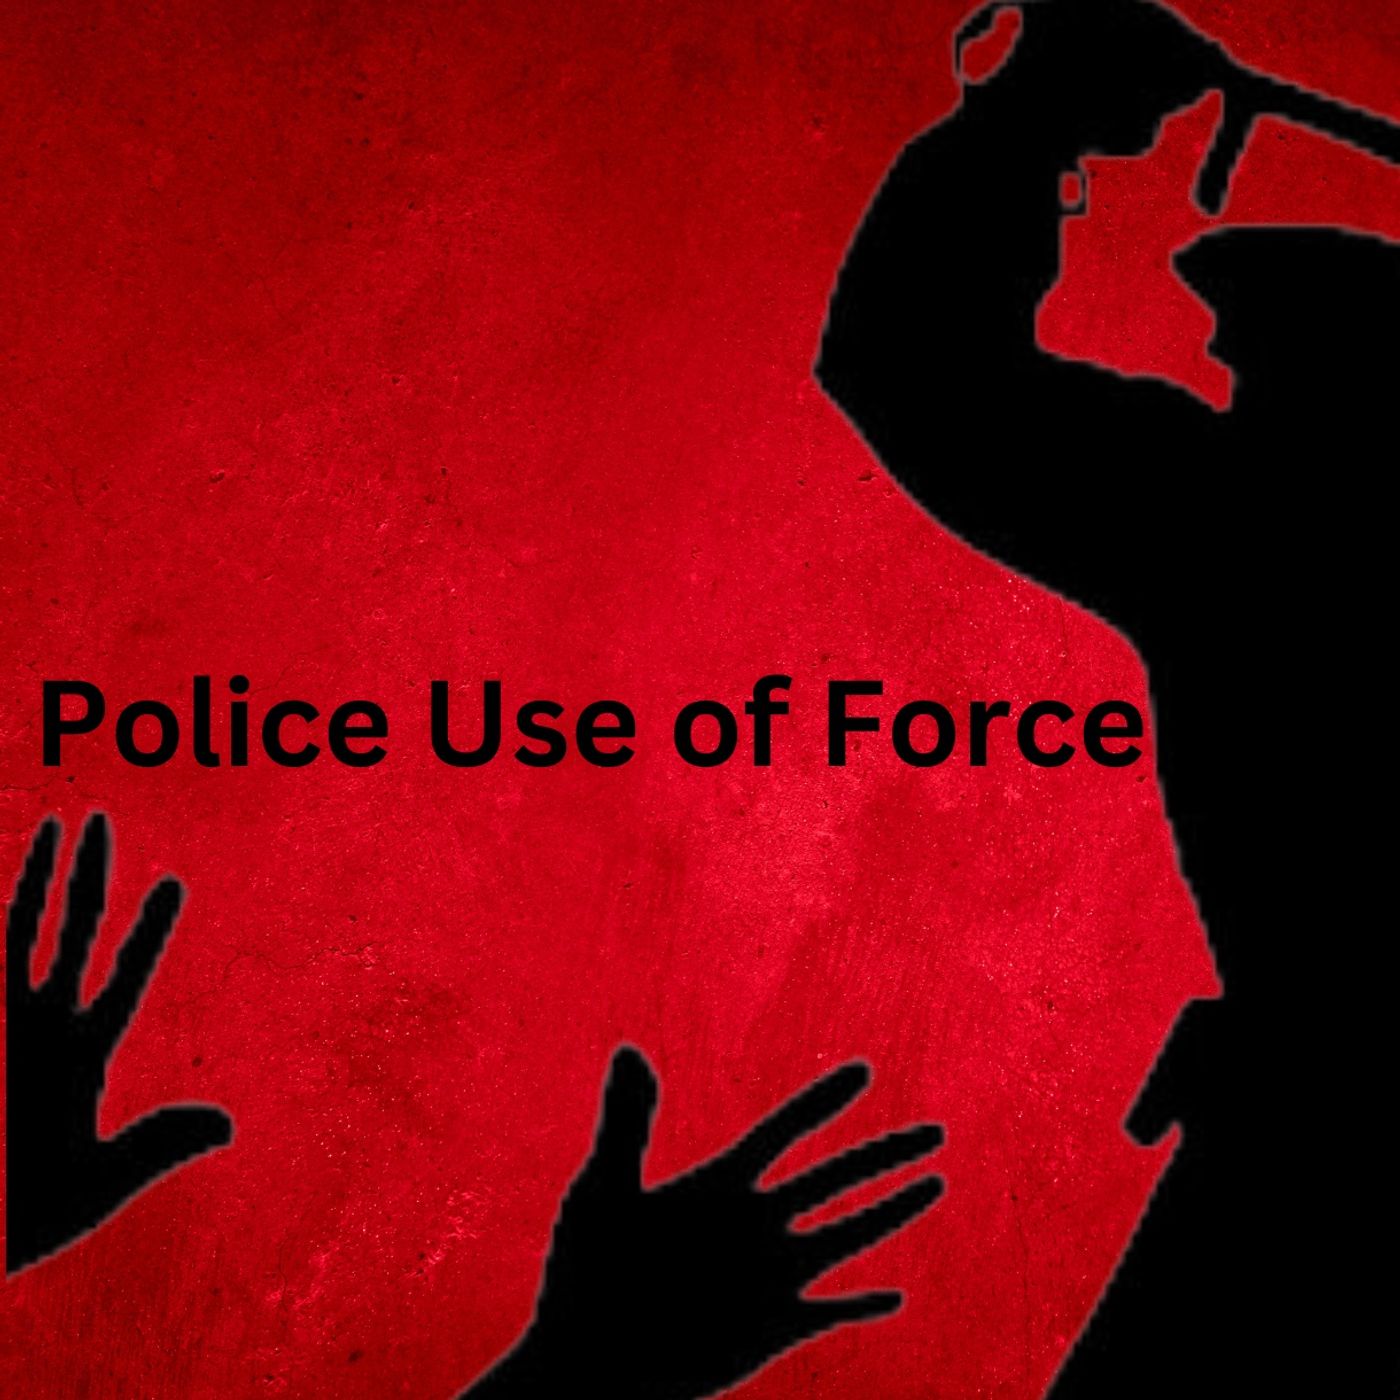 Top Use of Police Force Stories of 2022